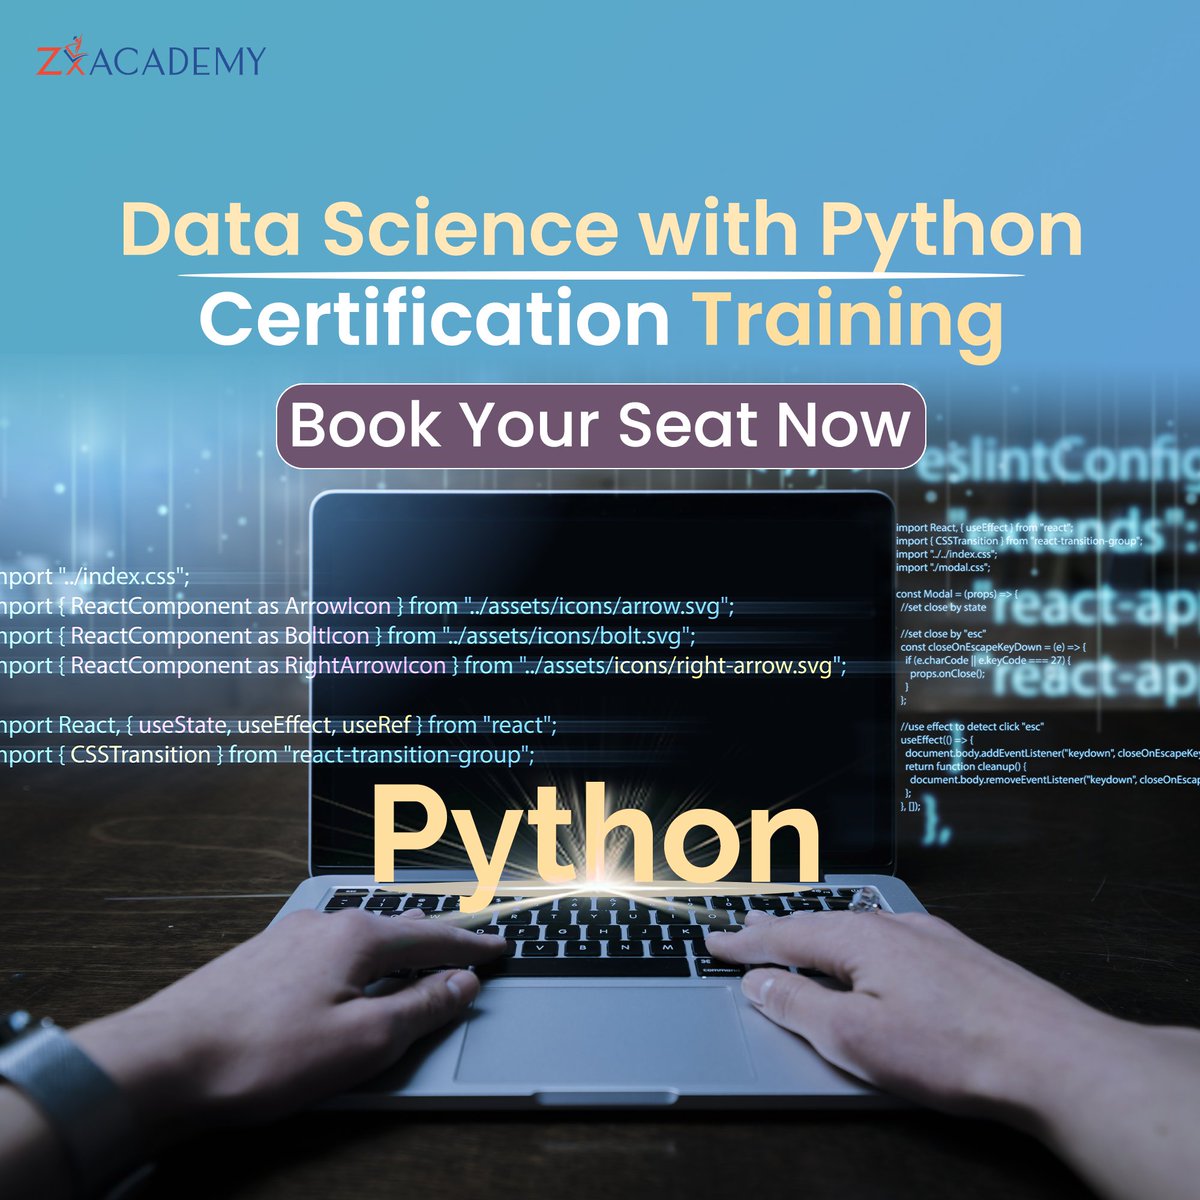 Upgrade your Skills on Your Data Science with python Journey with Zx Academy! 📷 #ZxAcademy #data #datascience #training #pythone #developers #engineers #Students #usa #uk #india #PythonDataScience #DataScienceTraining